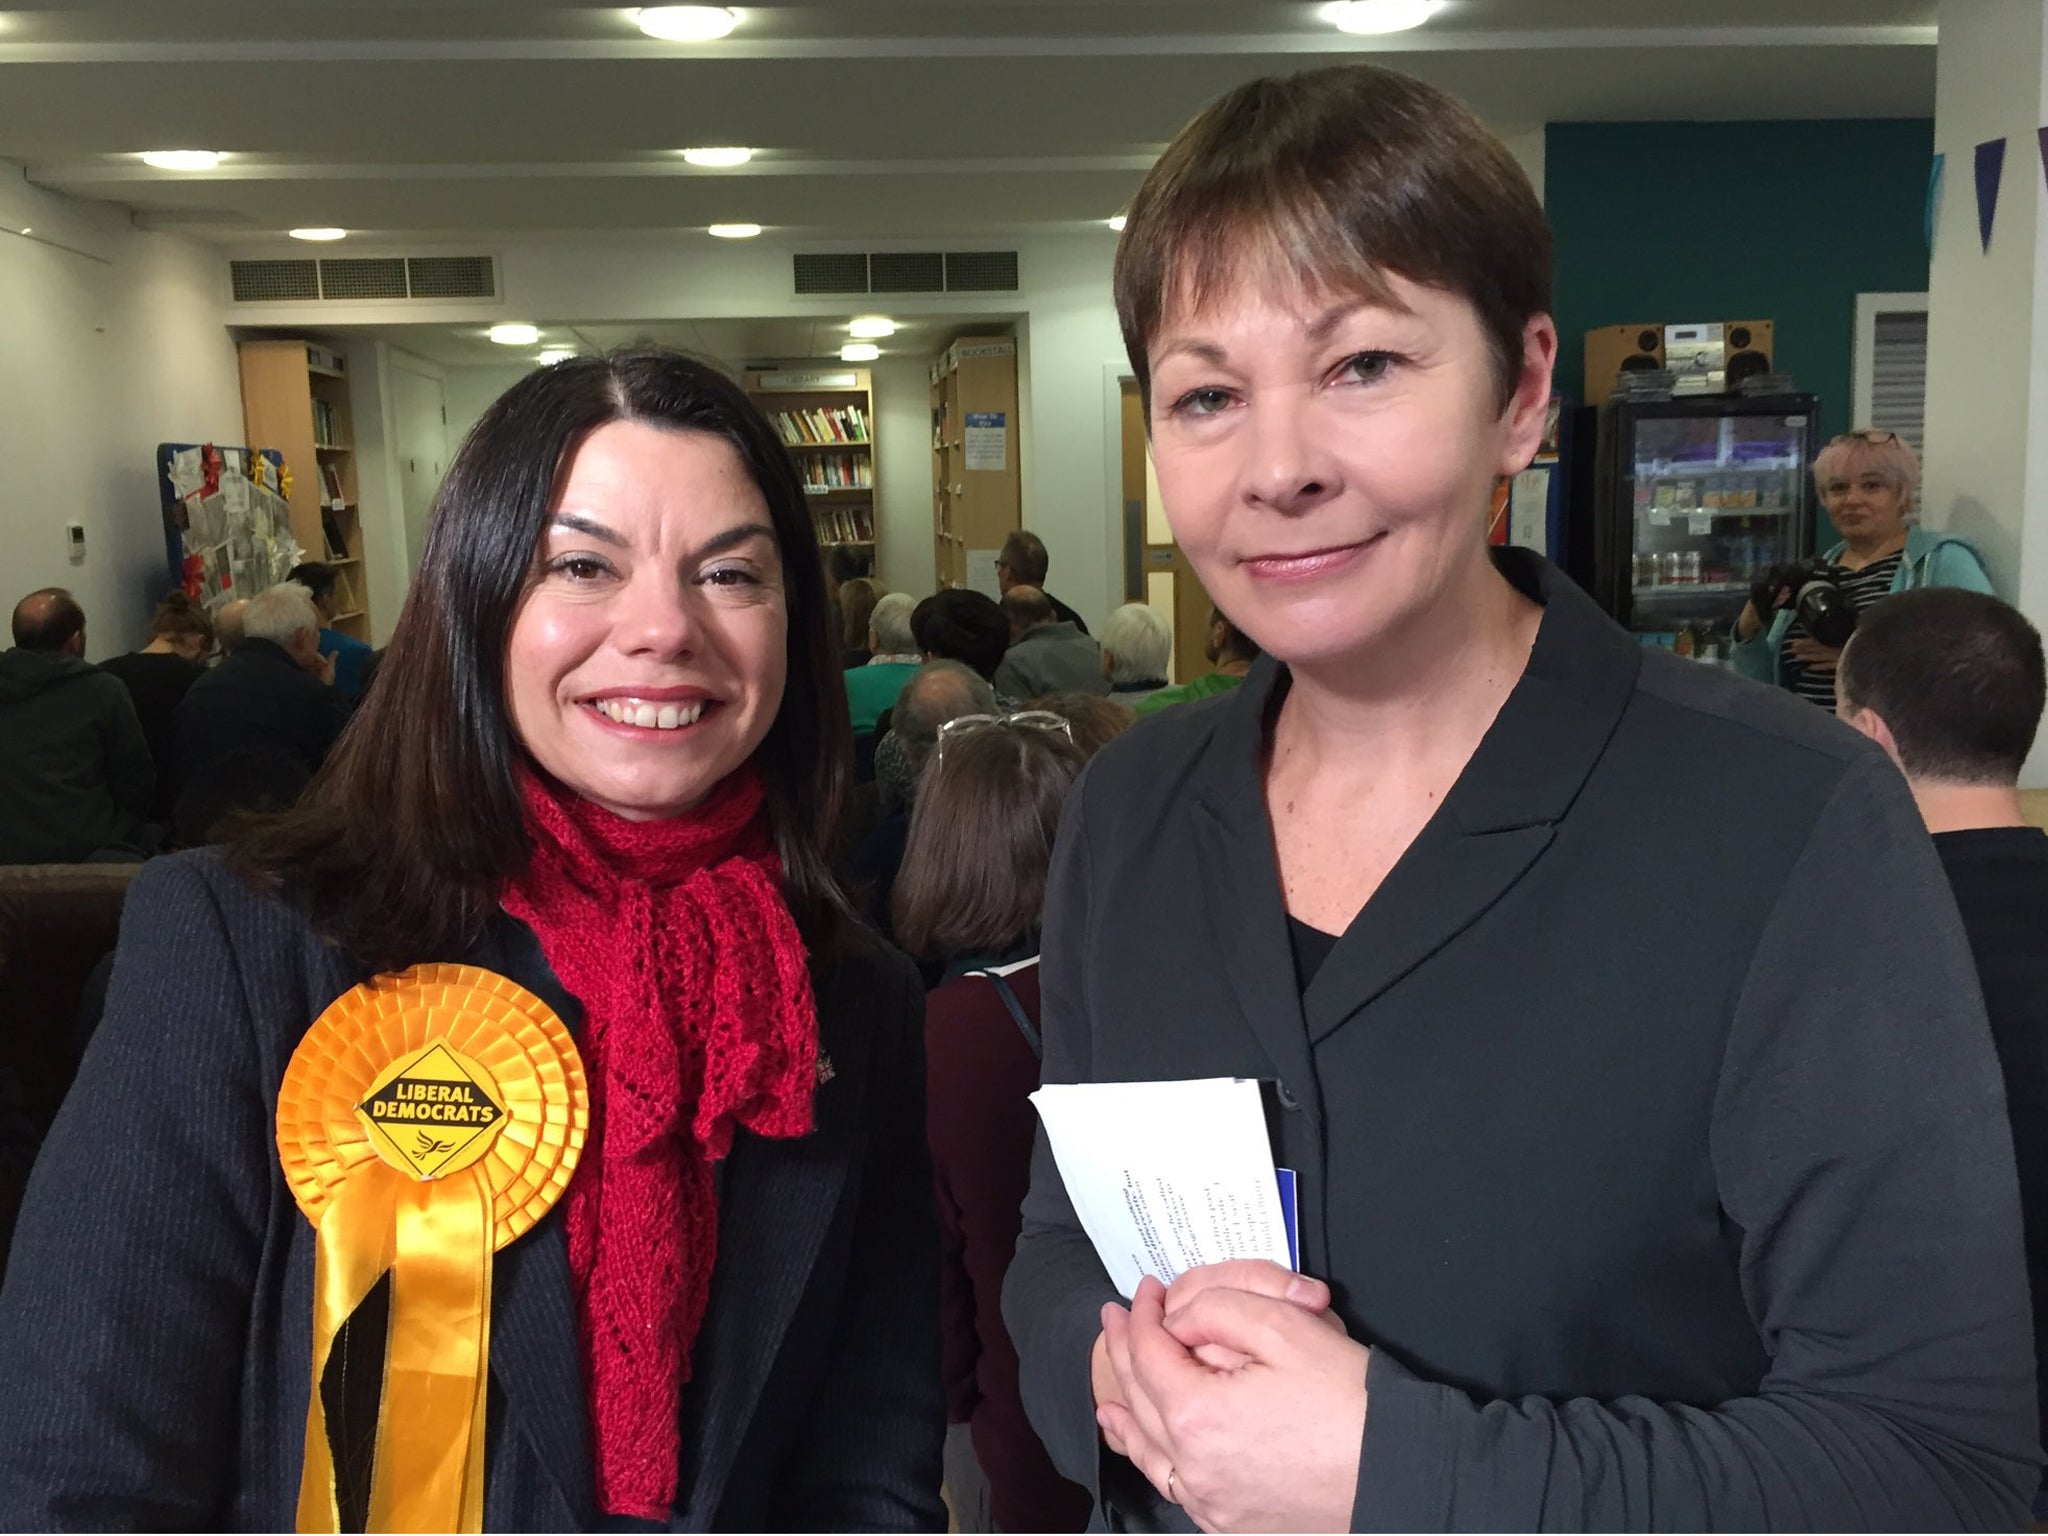 Green Party joint leader Caroline Lucas (right) backed the Liberal Democrats' Sarah Olney (left) in the Richmond Park by-election